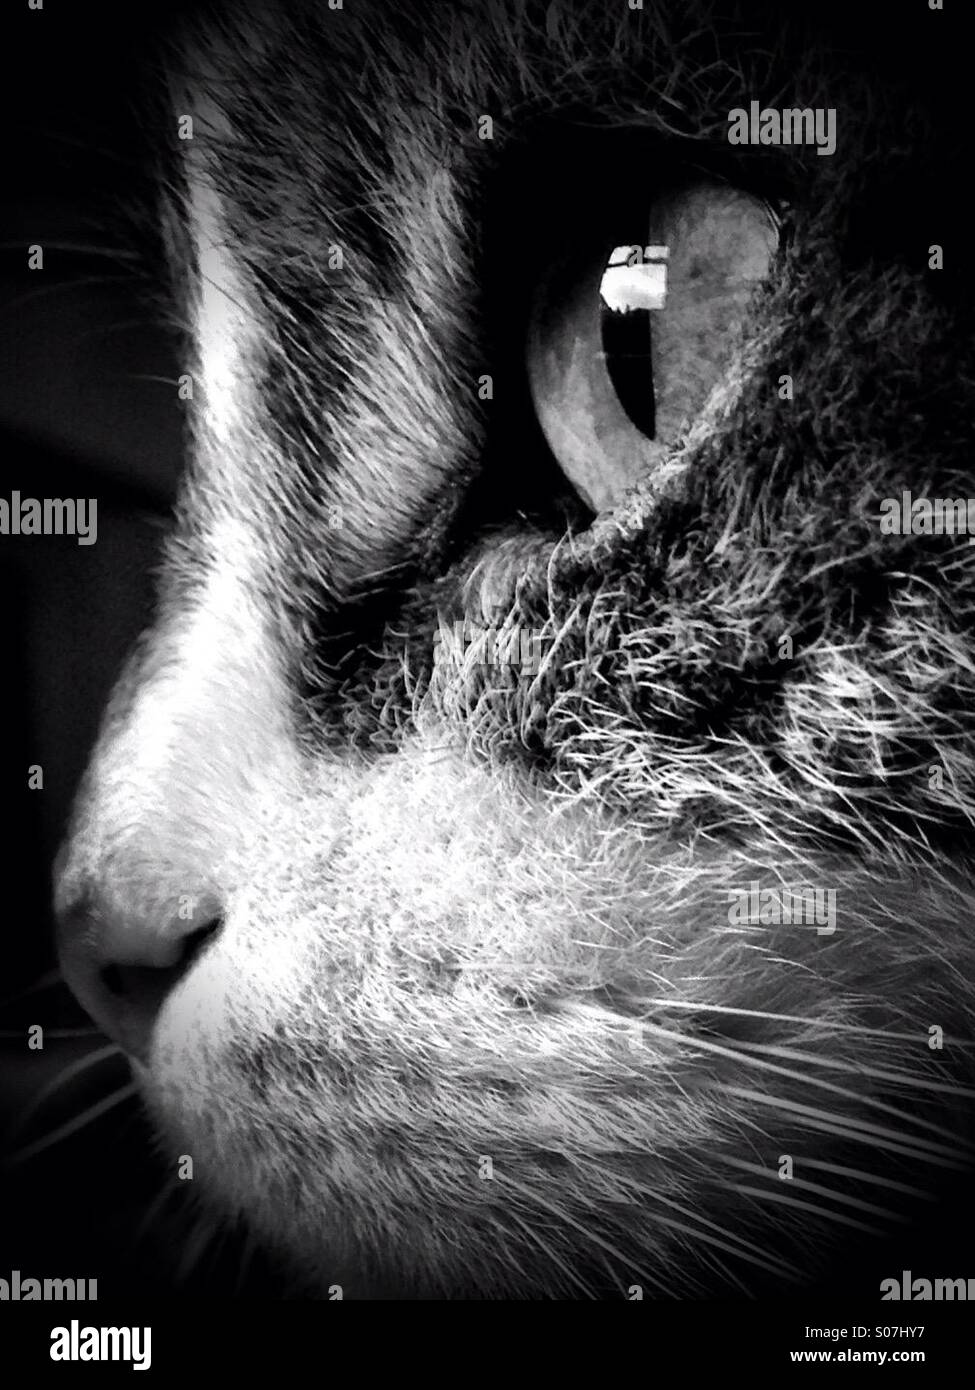 Profile of cats face. Black and white. Stock Photo